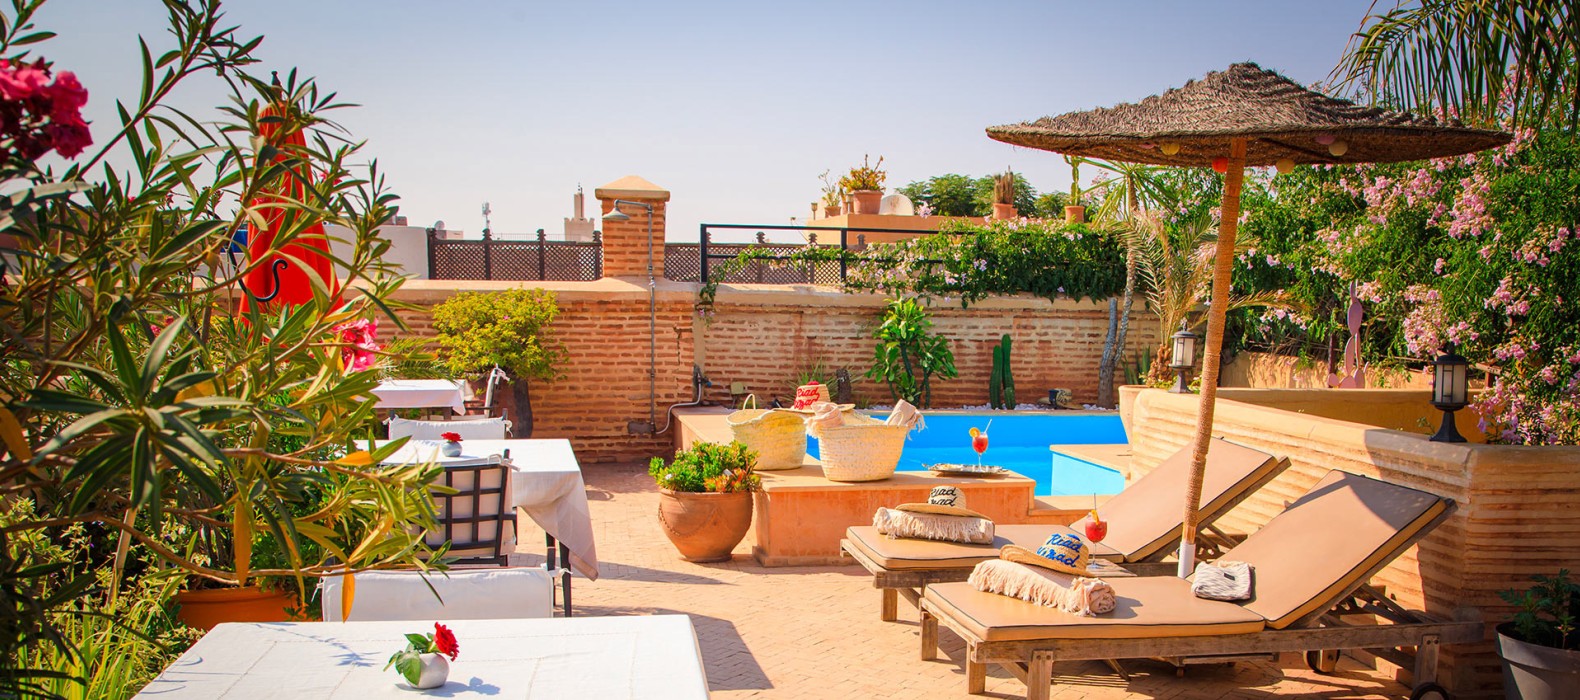 Rooftop pool area of Riad Yazid in Marrakech